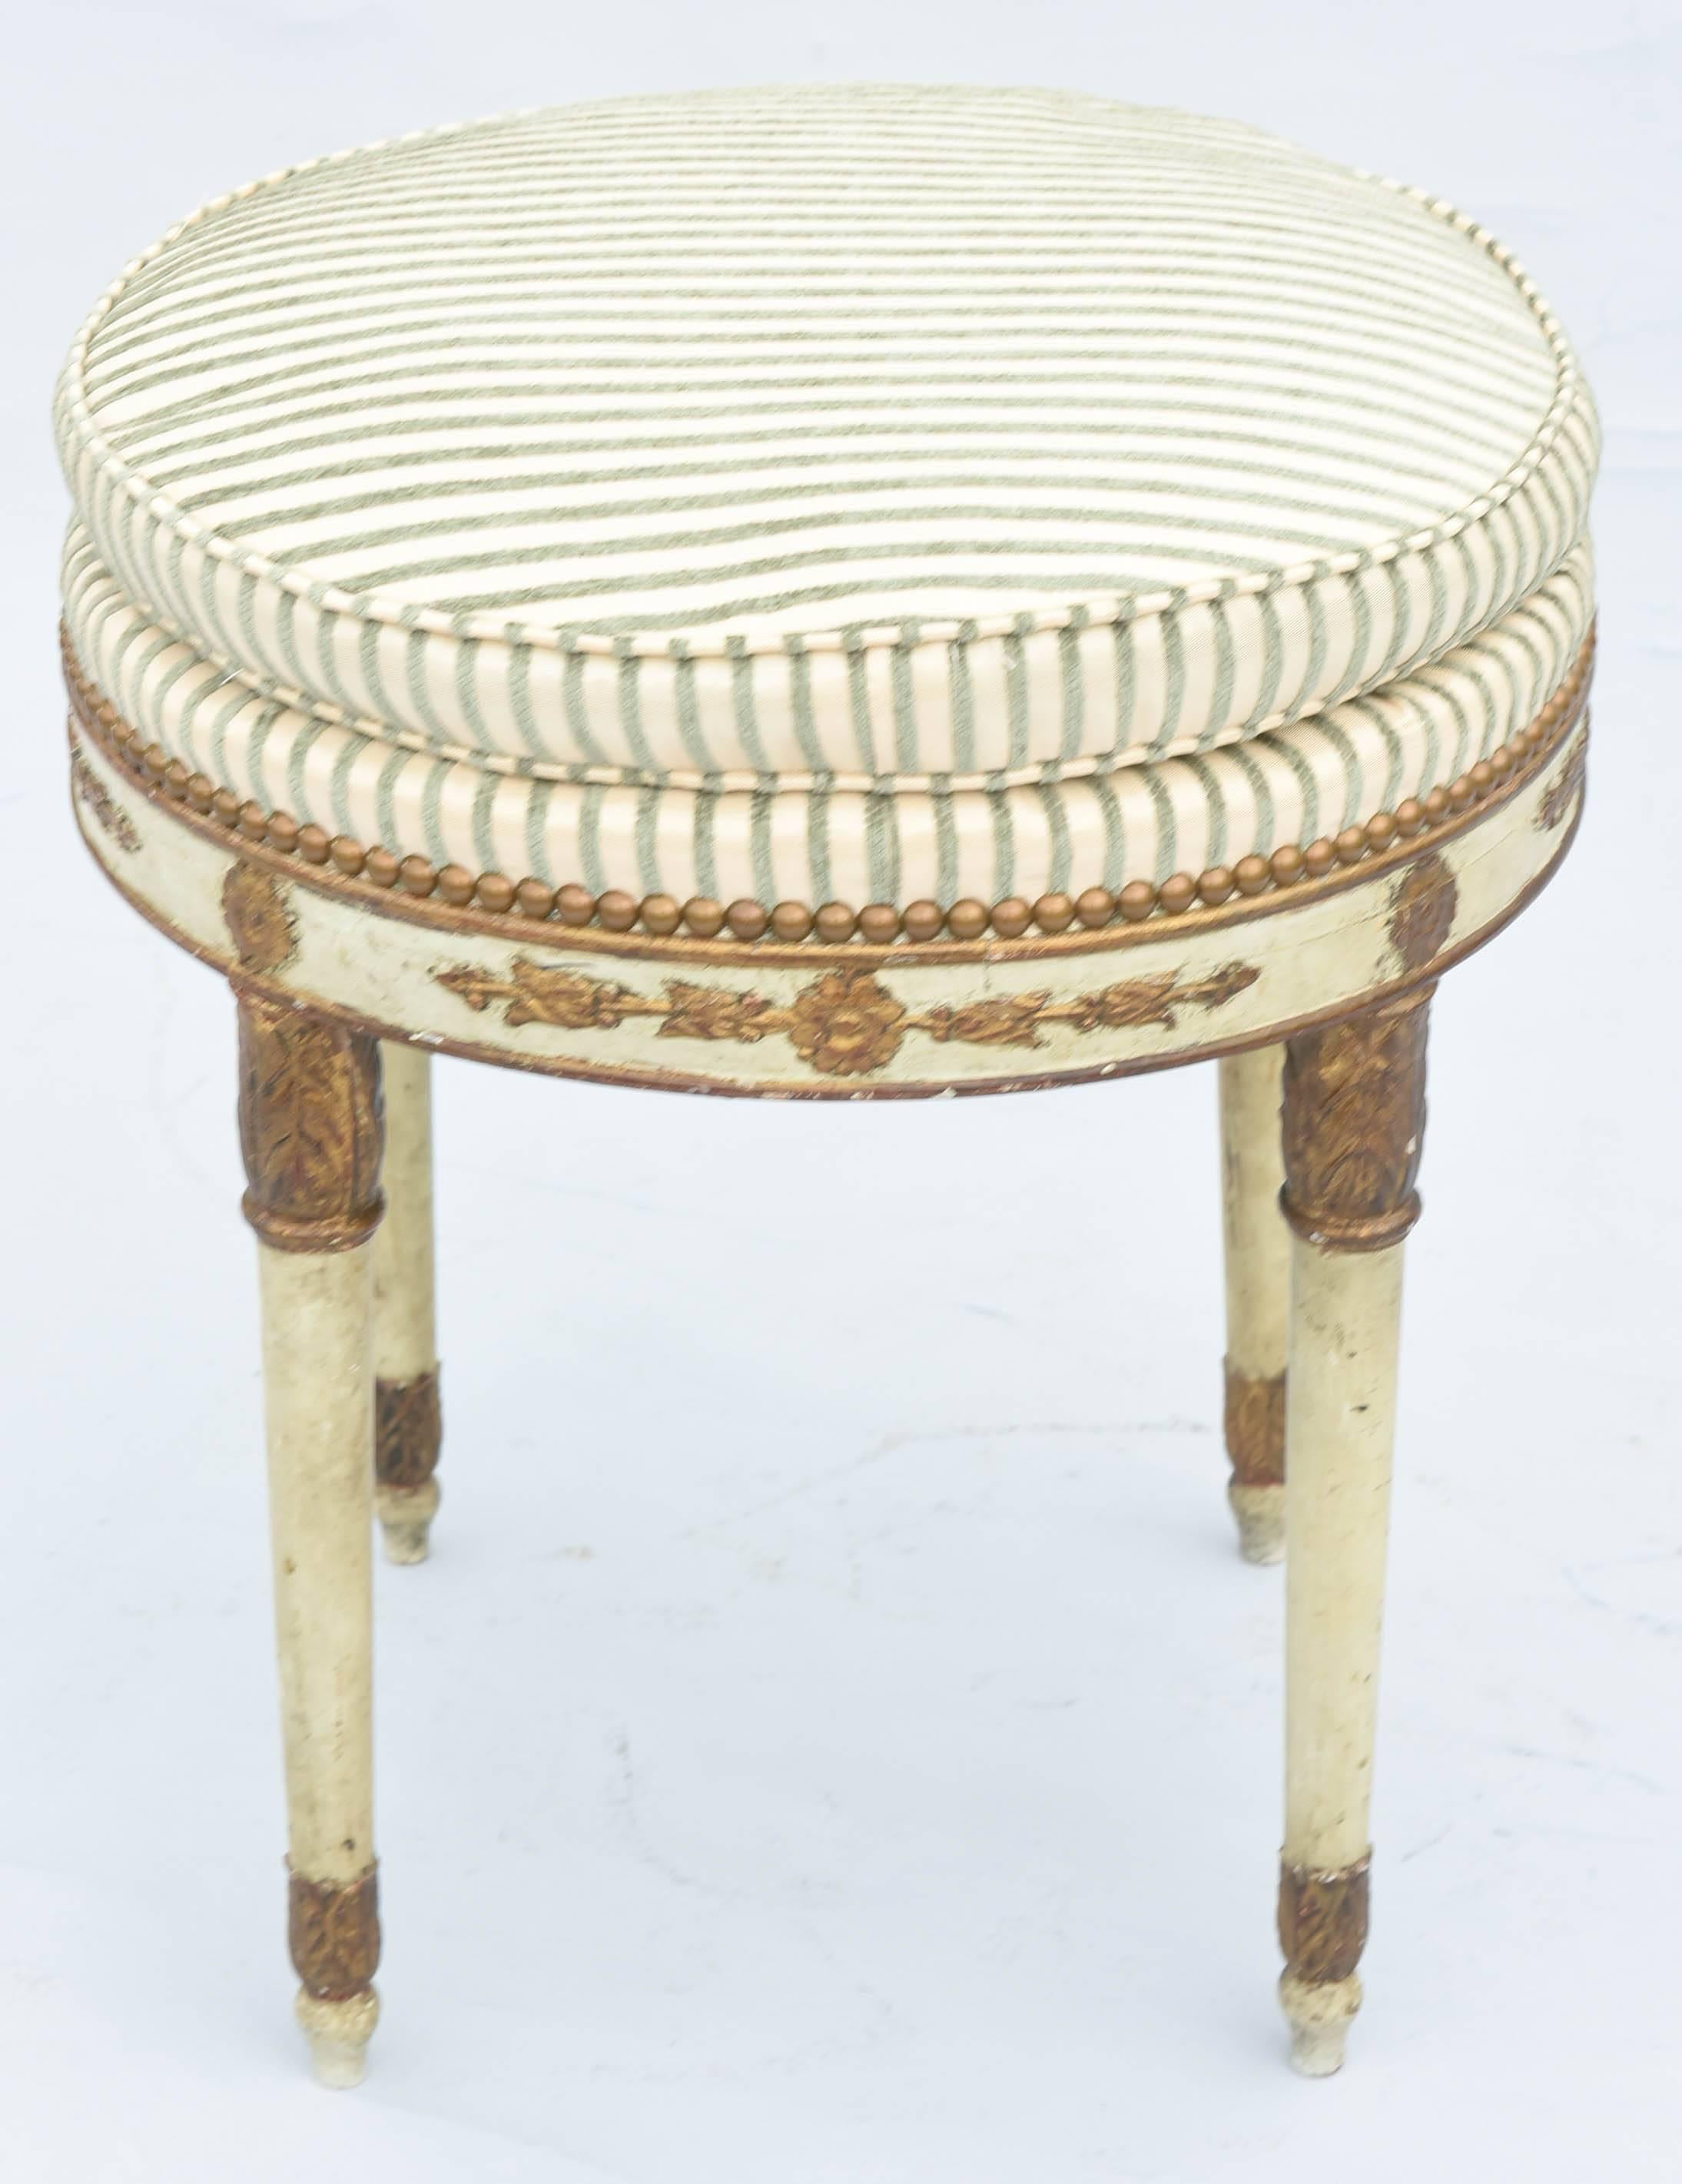 Stool, having a round boxed seat, of striped chenille, finished with nailheads, on painted and parcel gilt base, its apron decorated by rosettes and acanthus, raised on foliate-headed, round, tapering legs, ending in acanthine, touipe feet.

Stock